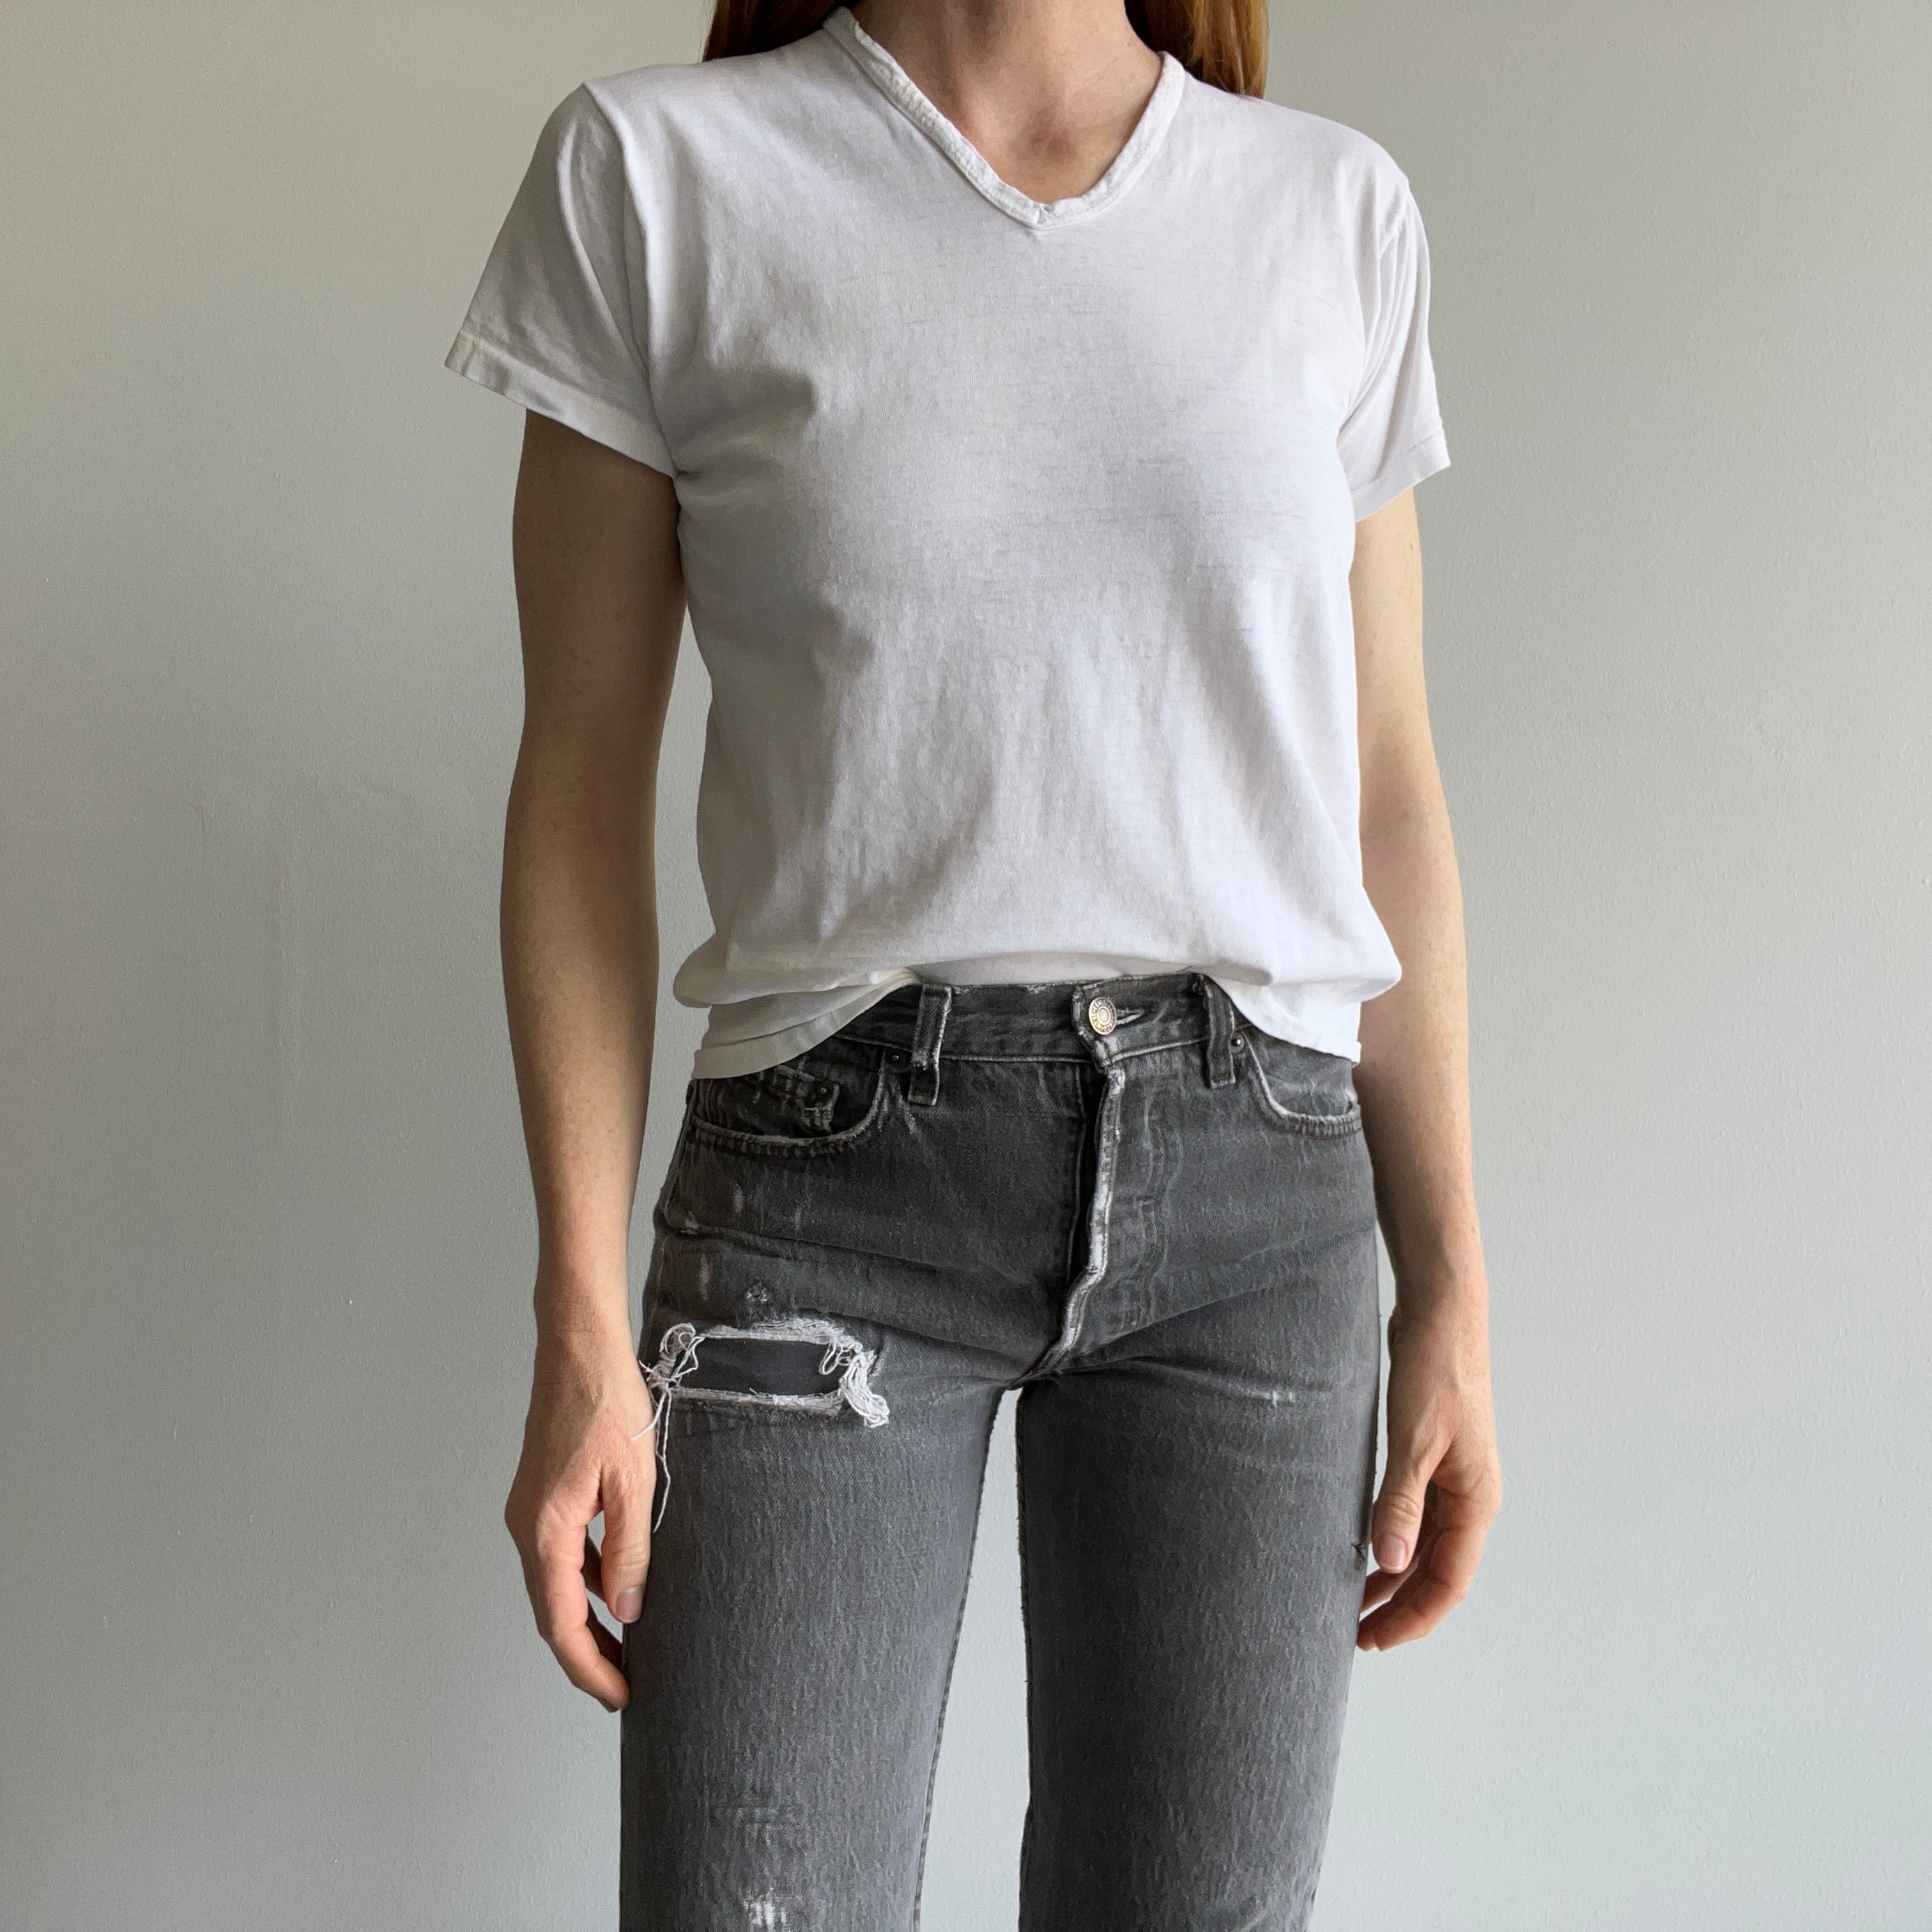 1970s Stained Blank White Cotton V-Neck T-Shirt by FOTL